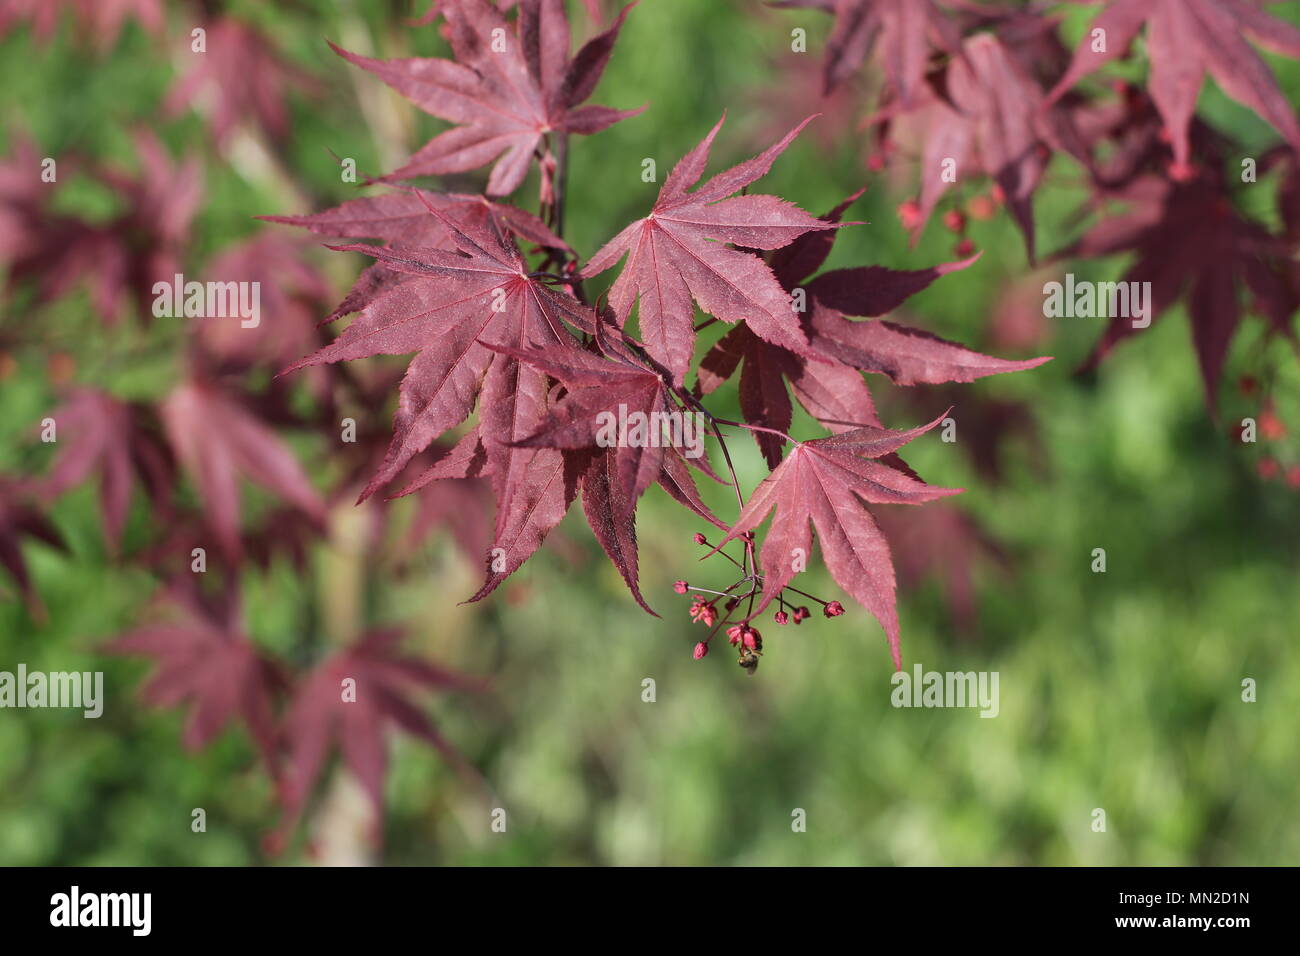 Red leaves and flowers of Japanese maple (Acer palmatum) Stock Photo